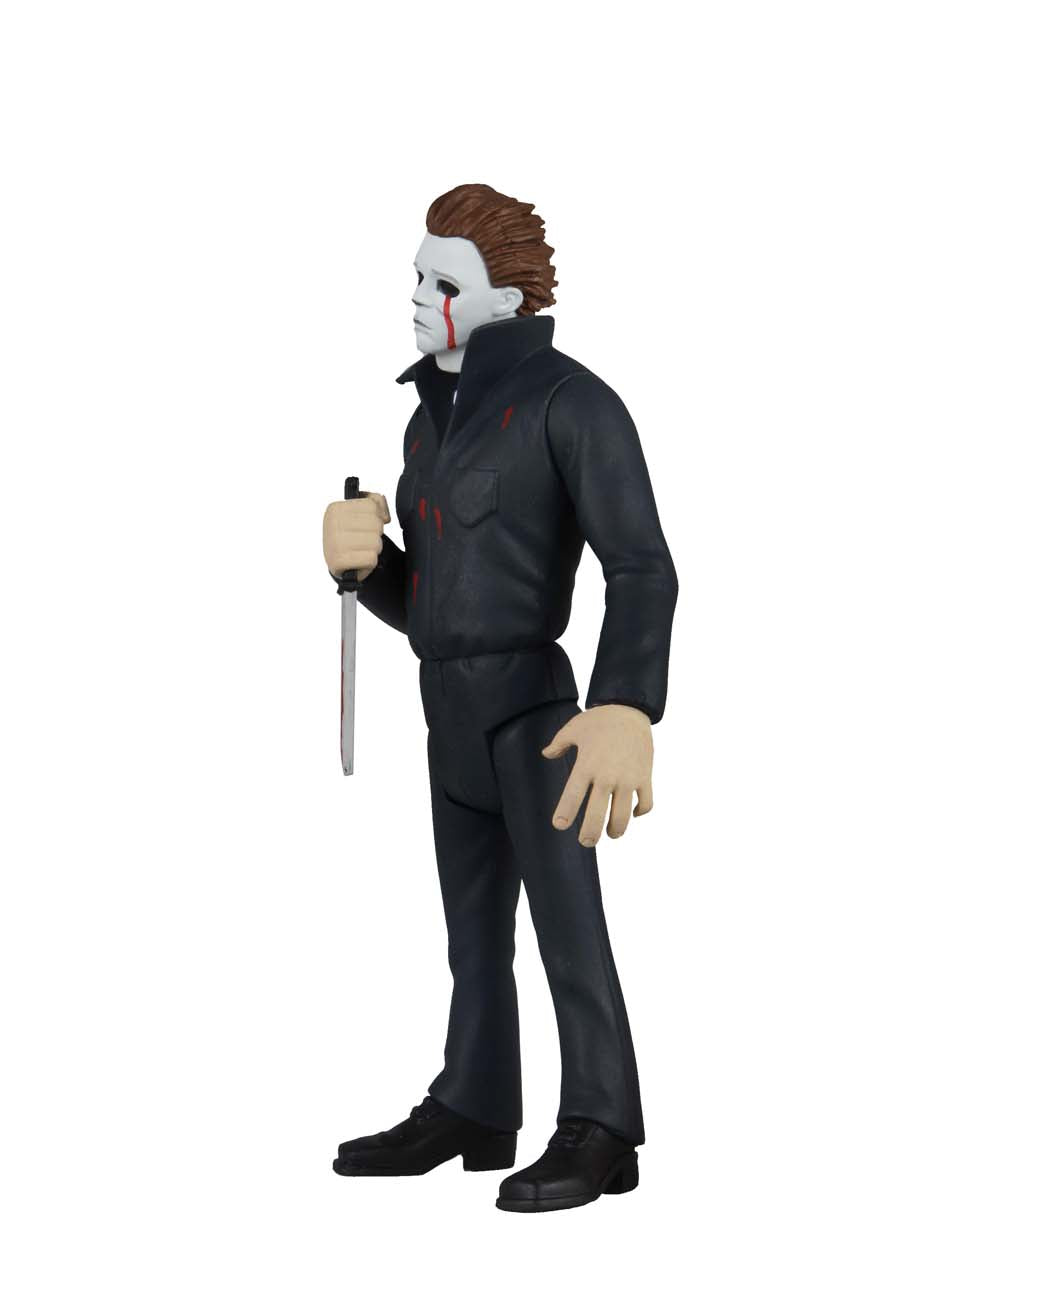 This is NECA Toony Terror Series 5 Halloween 2 Michael Myers and he has blood tears and is holding a bloody knife and wearing coveralls and black boots.